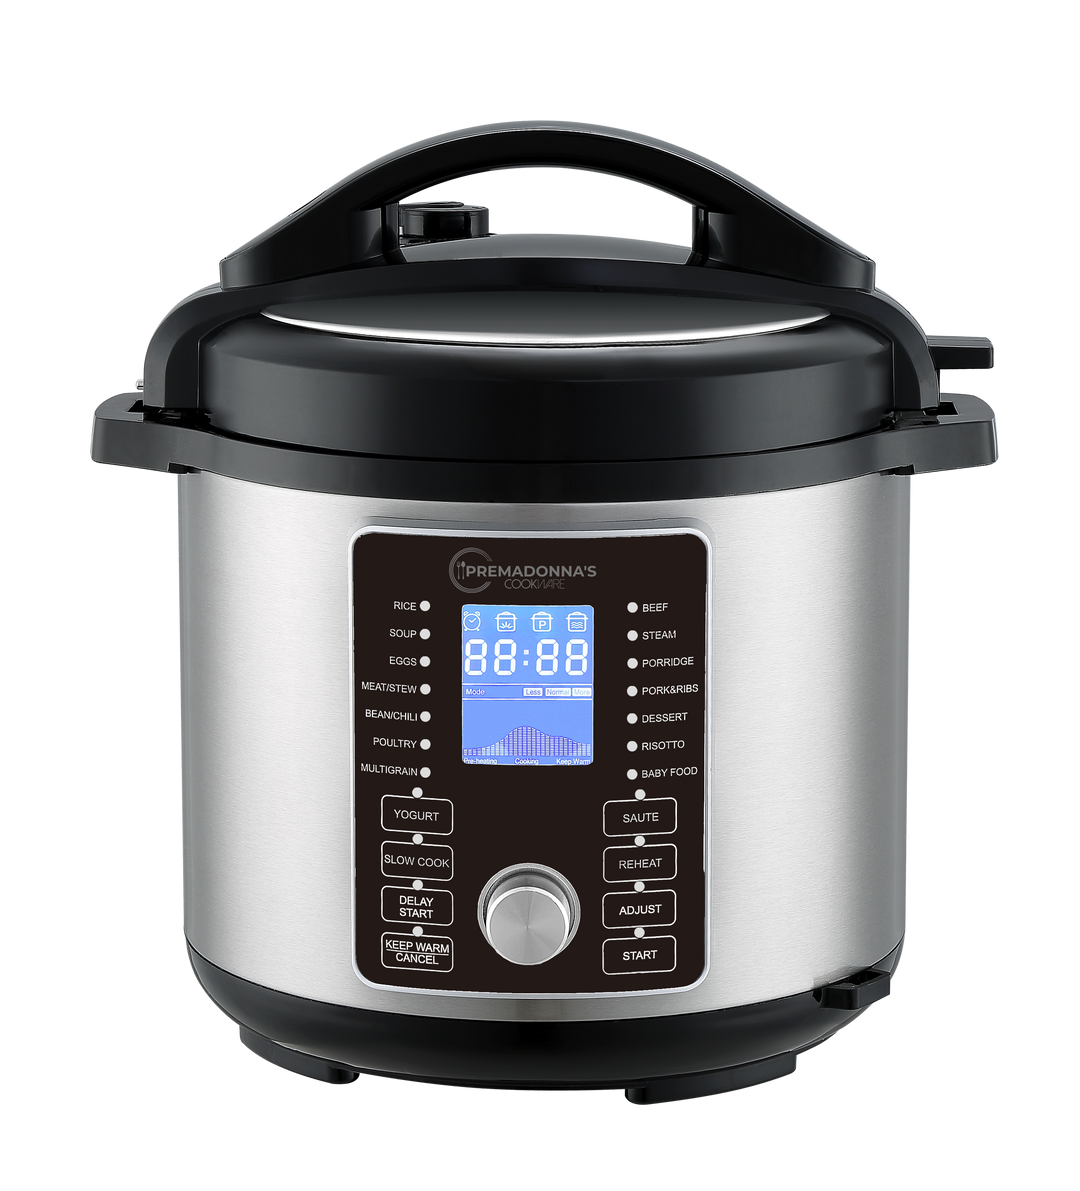 Electric Pressure Cookers in Kenya: Are They Truly Energy Efficient?